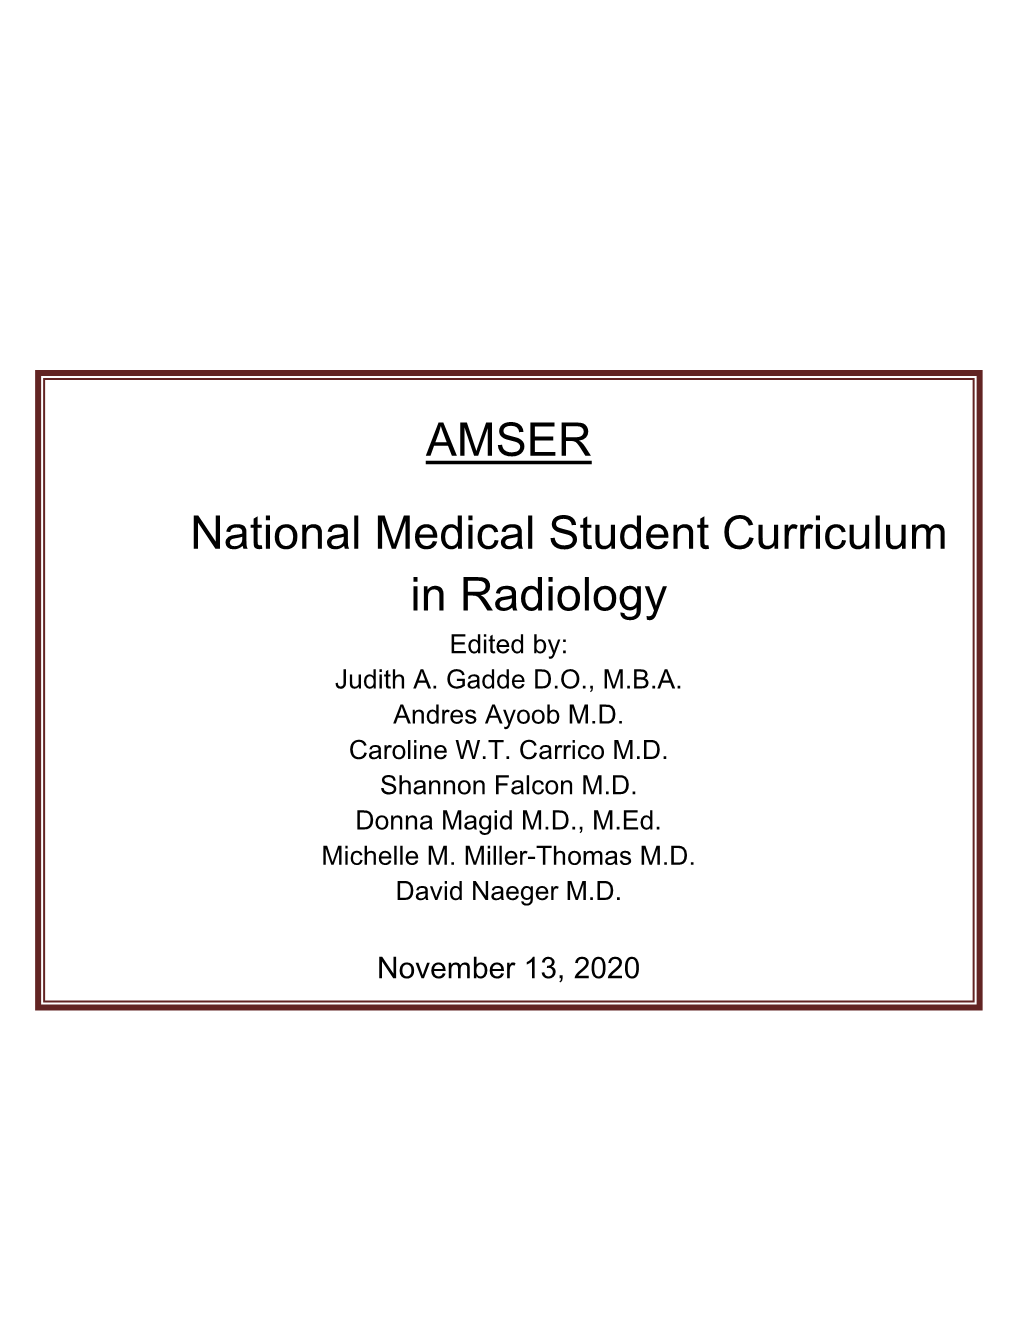 AMSER National Medical Student Curriculum in Radiology